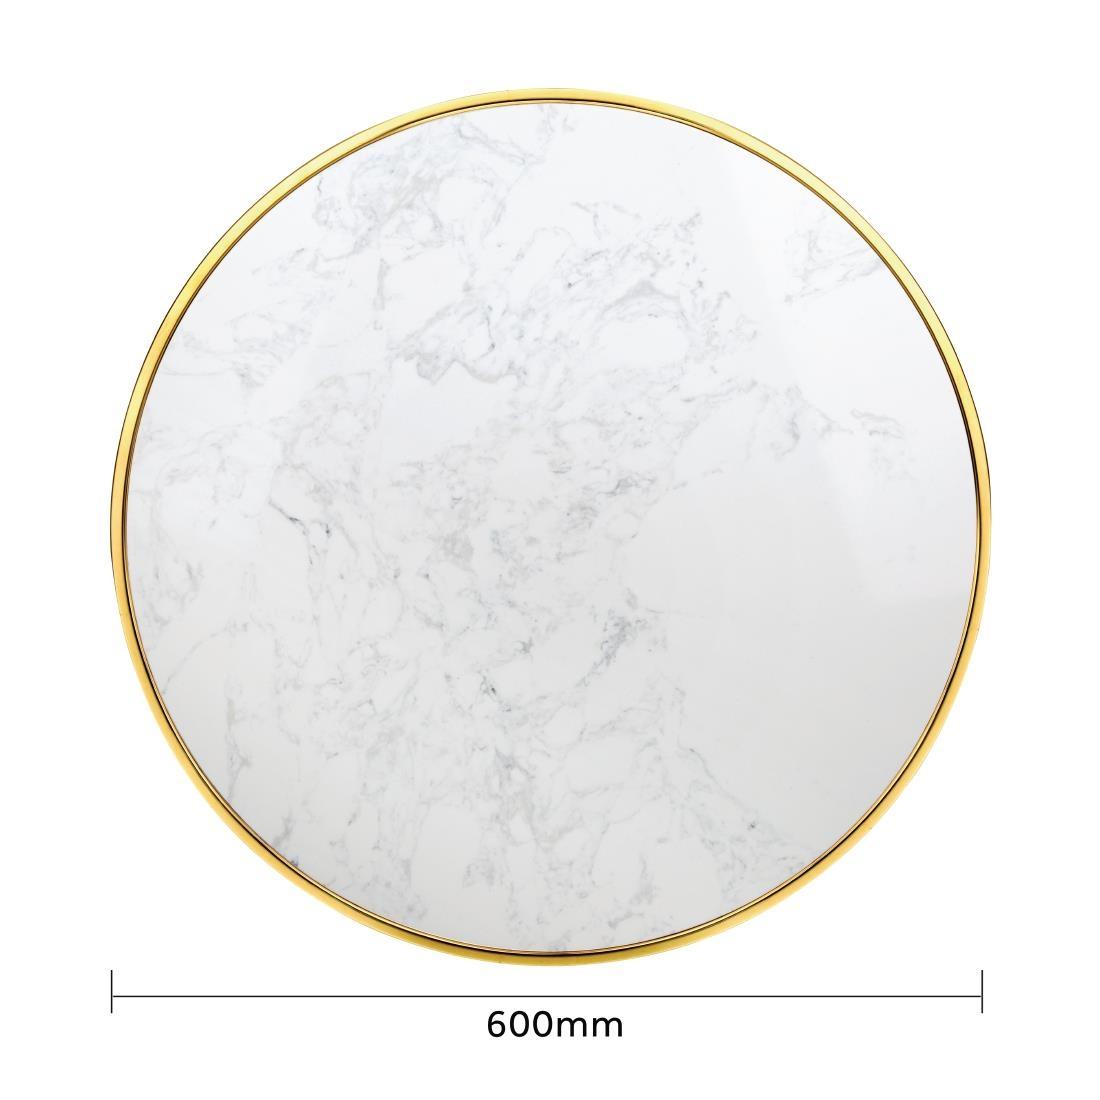 Bolero Round Marble Table Top with Brass Effect Rim White 600mm - CY968  - 5